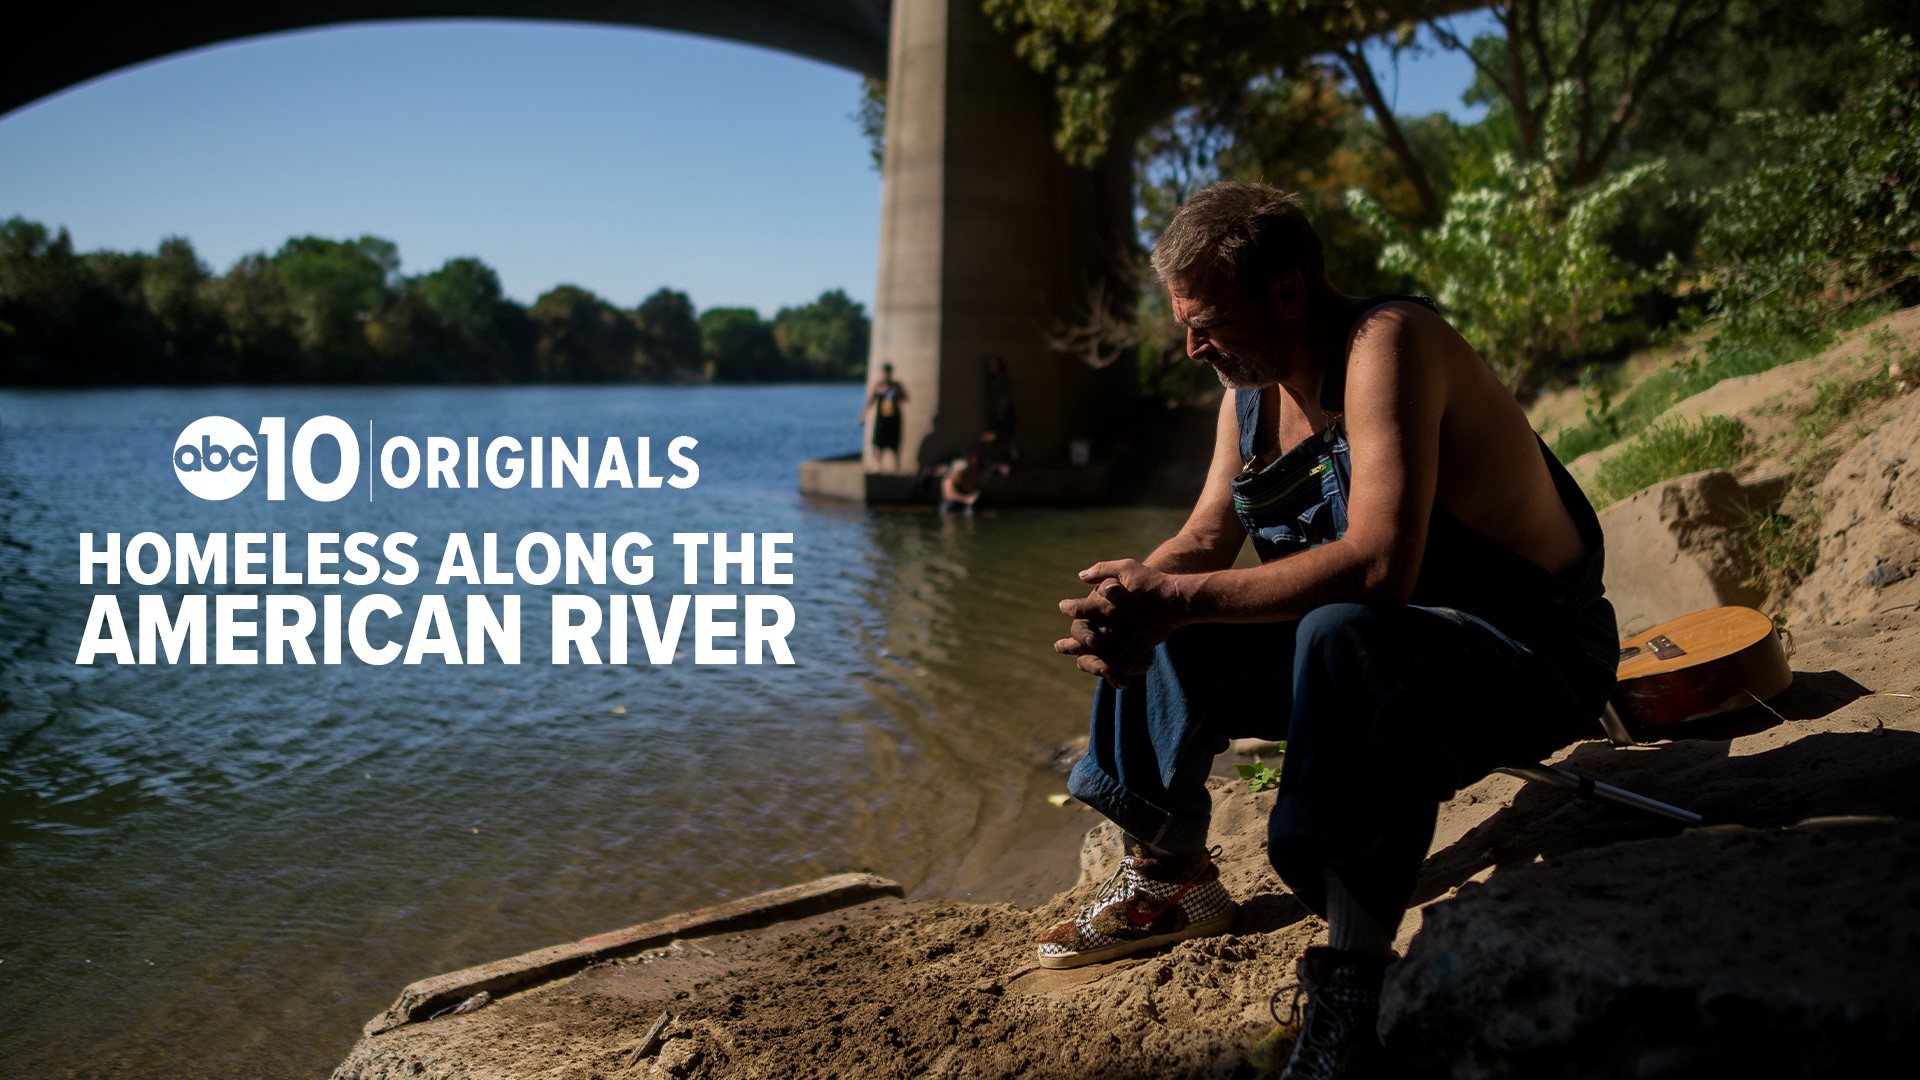 On any given night in Sacramento, nearly 5,600 people are experiencing homelessness. Roughly four hundred people have taken shelter along the American River.